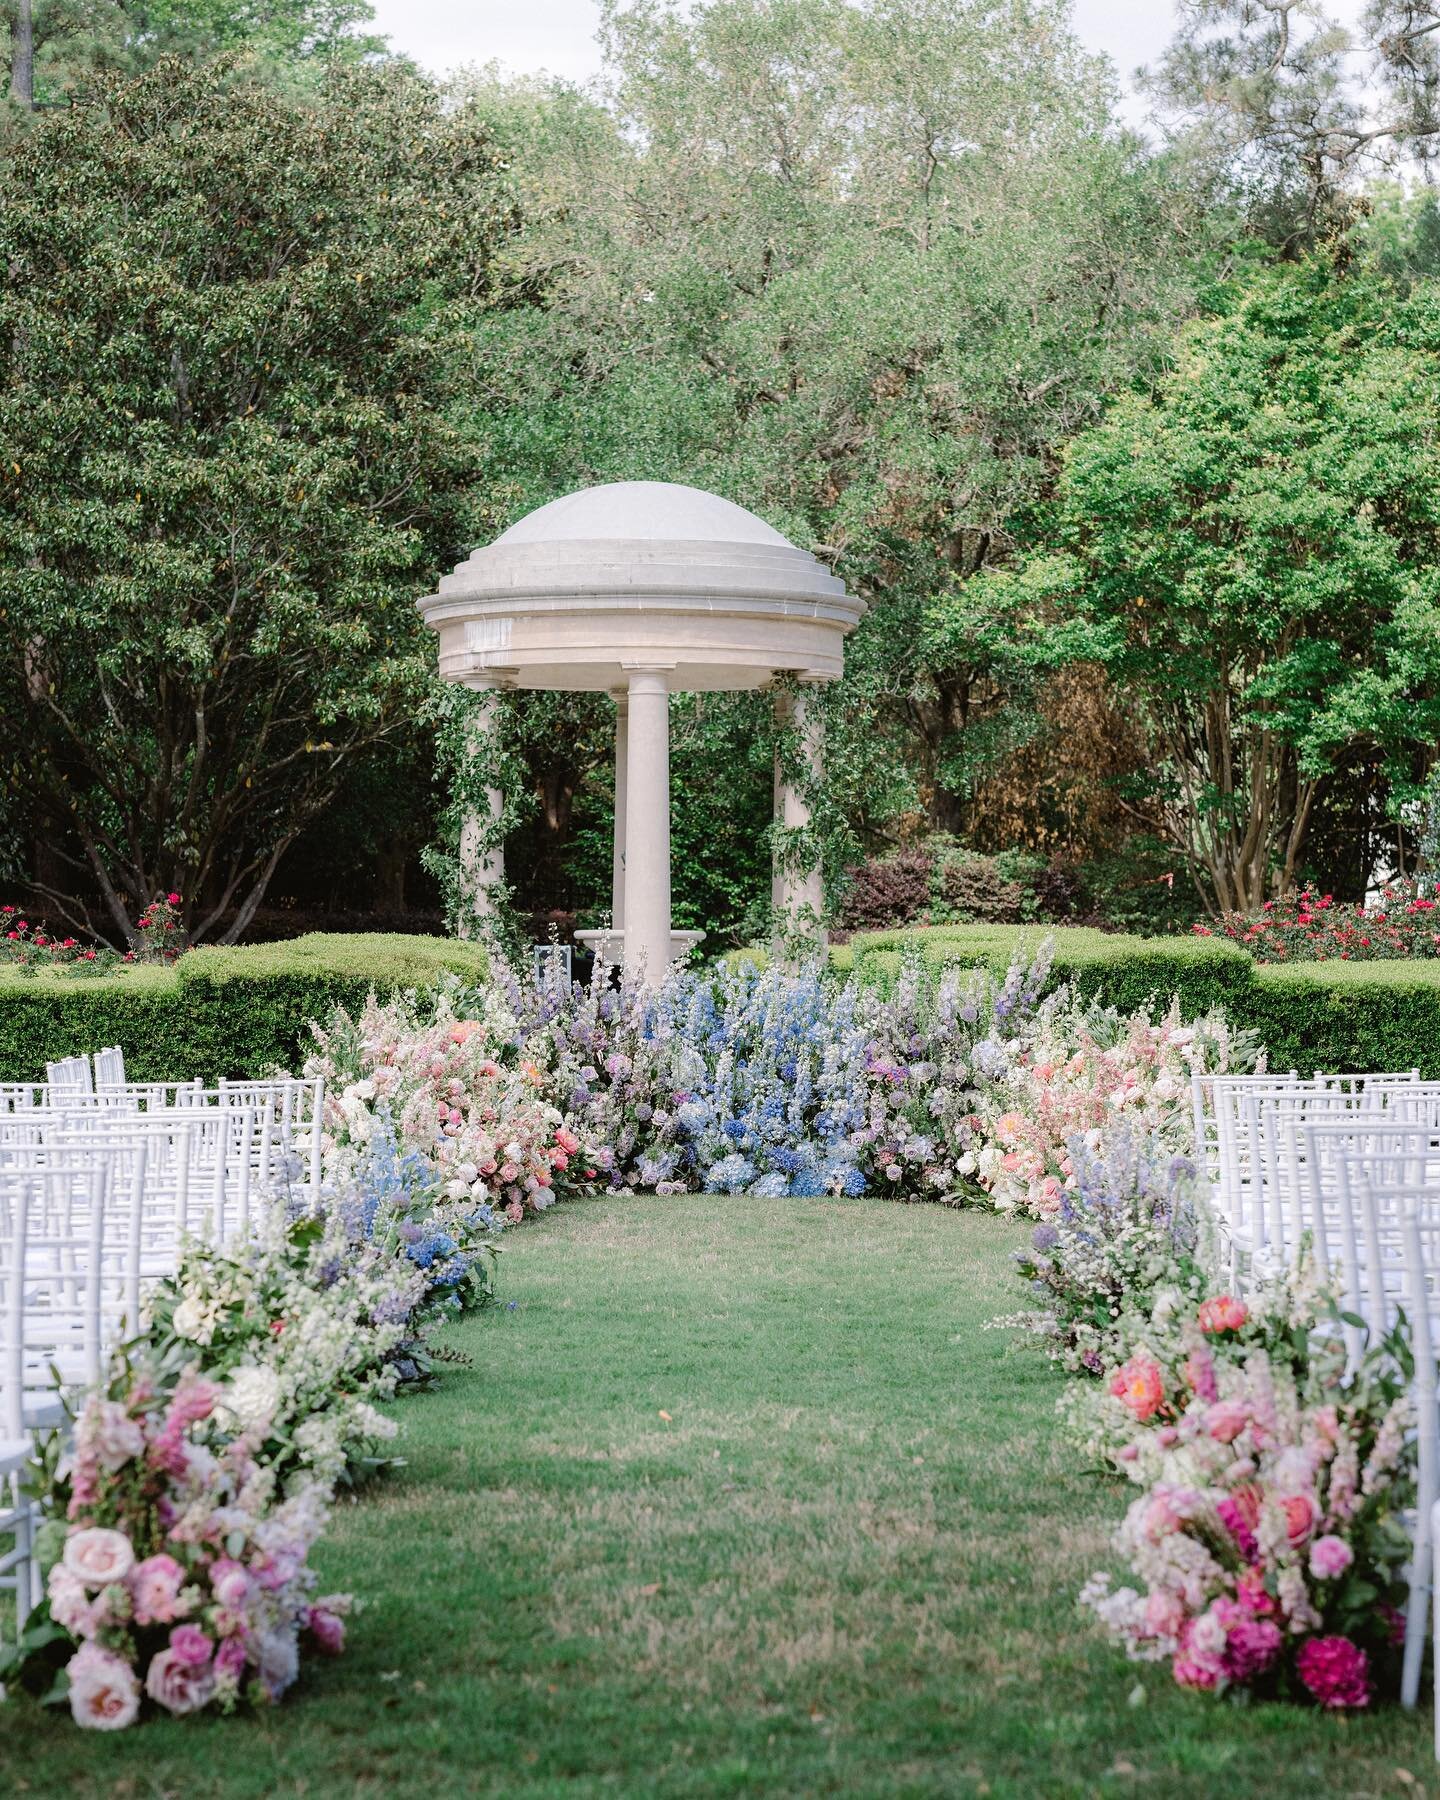 Still so delighted with this ceremony design. 🌸

Beyond the spectacular florals, the front rows were arranged as runway style seating for immediate family and ribbons in the tree at the back of the ceremony lawn made it that much more enchanting. Th